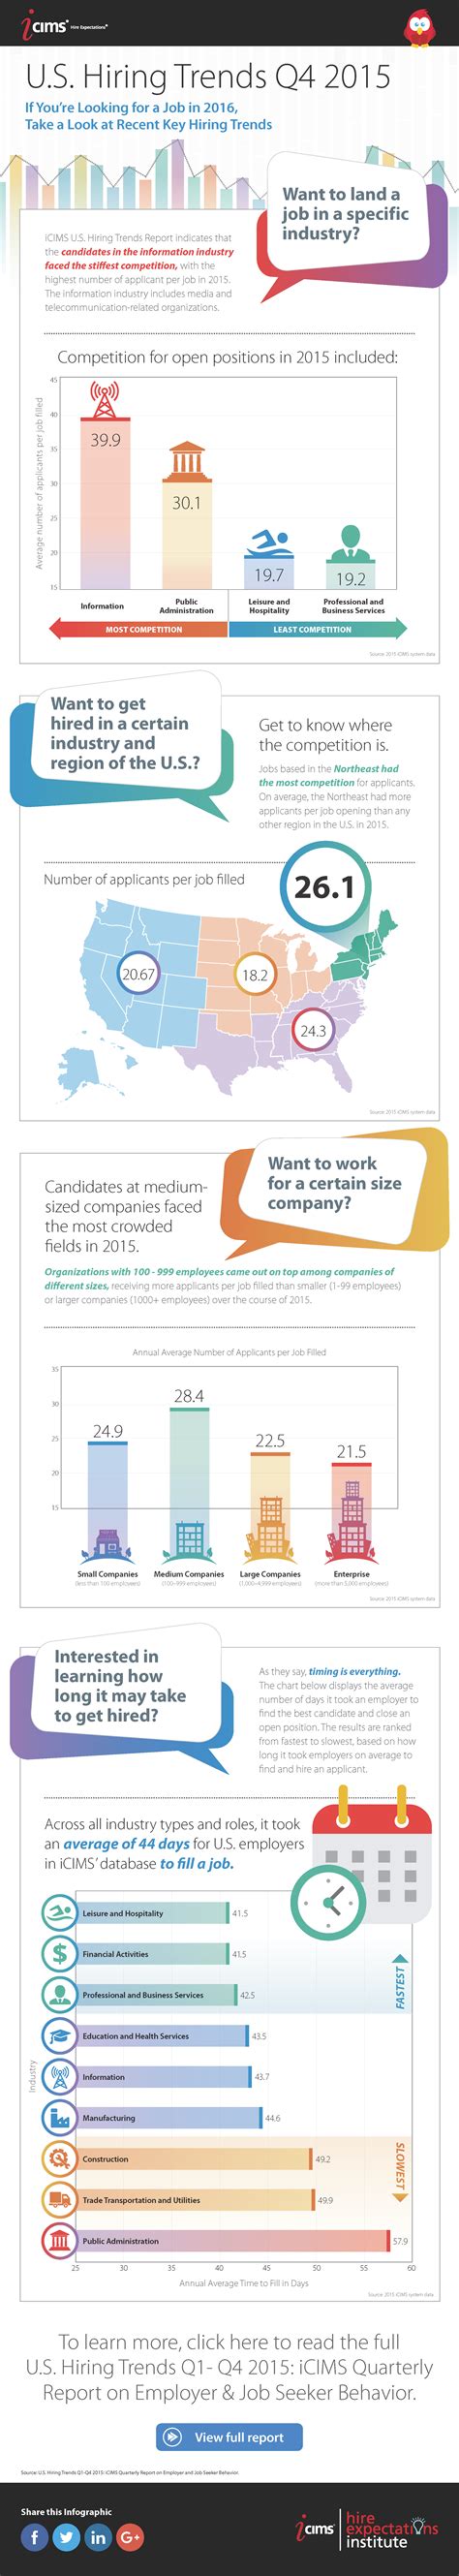 Recruiting Is Only Getting Tougher [infographic]